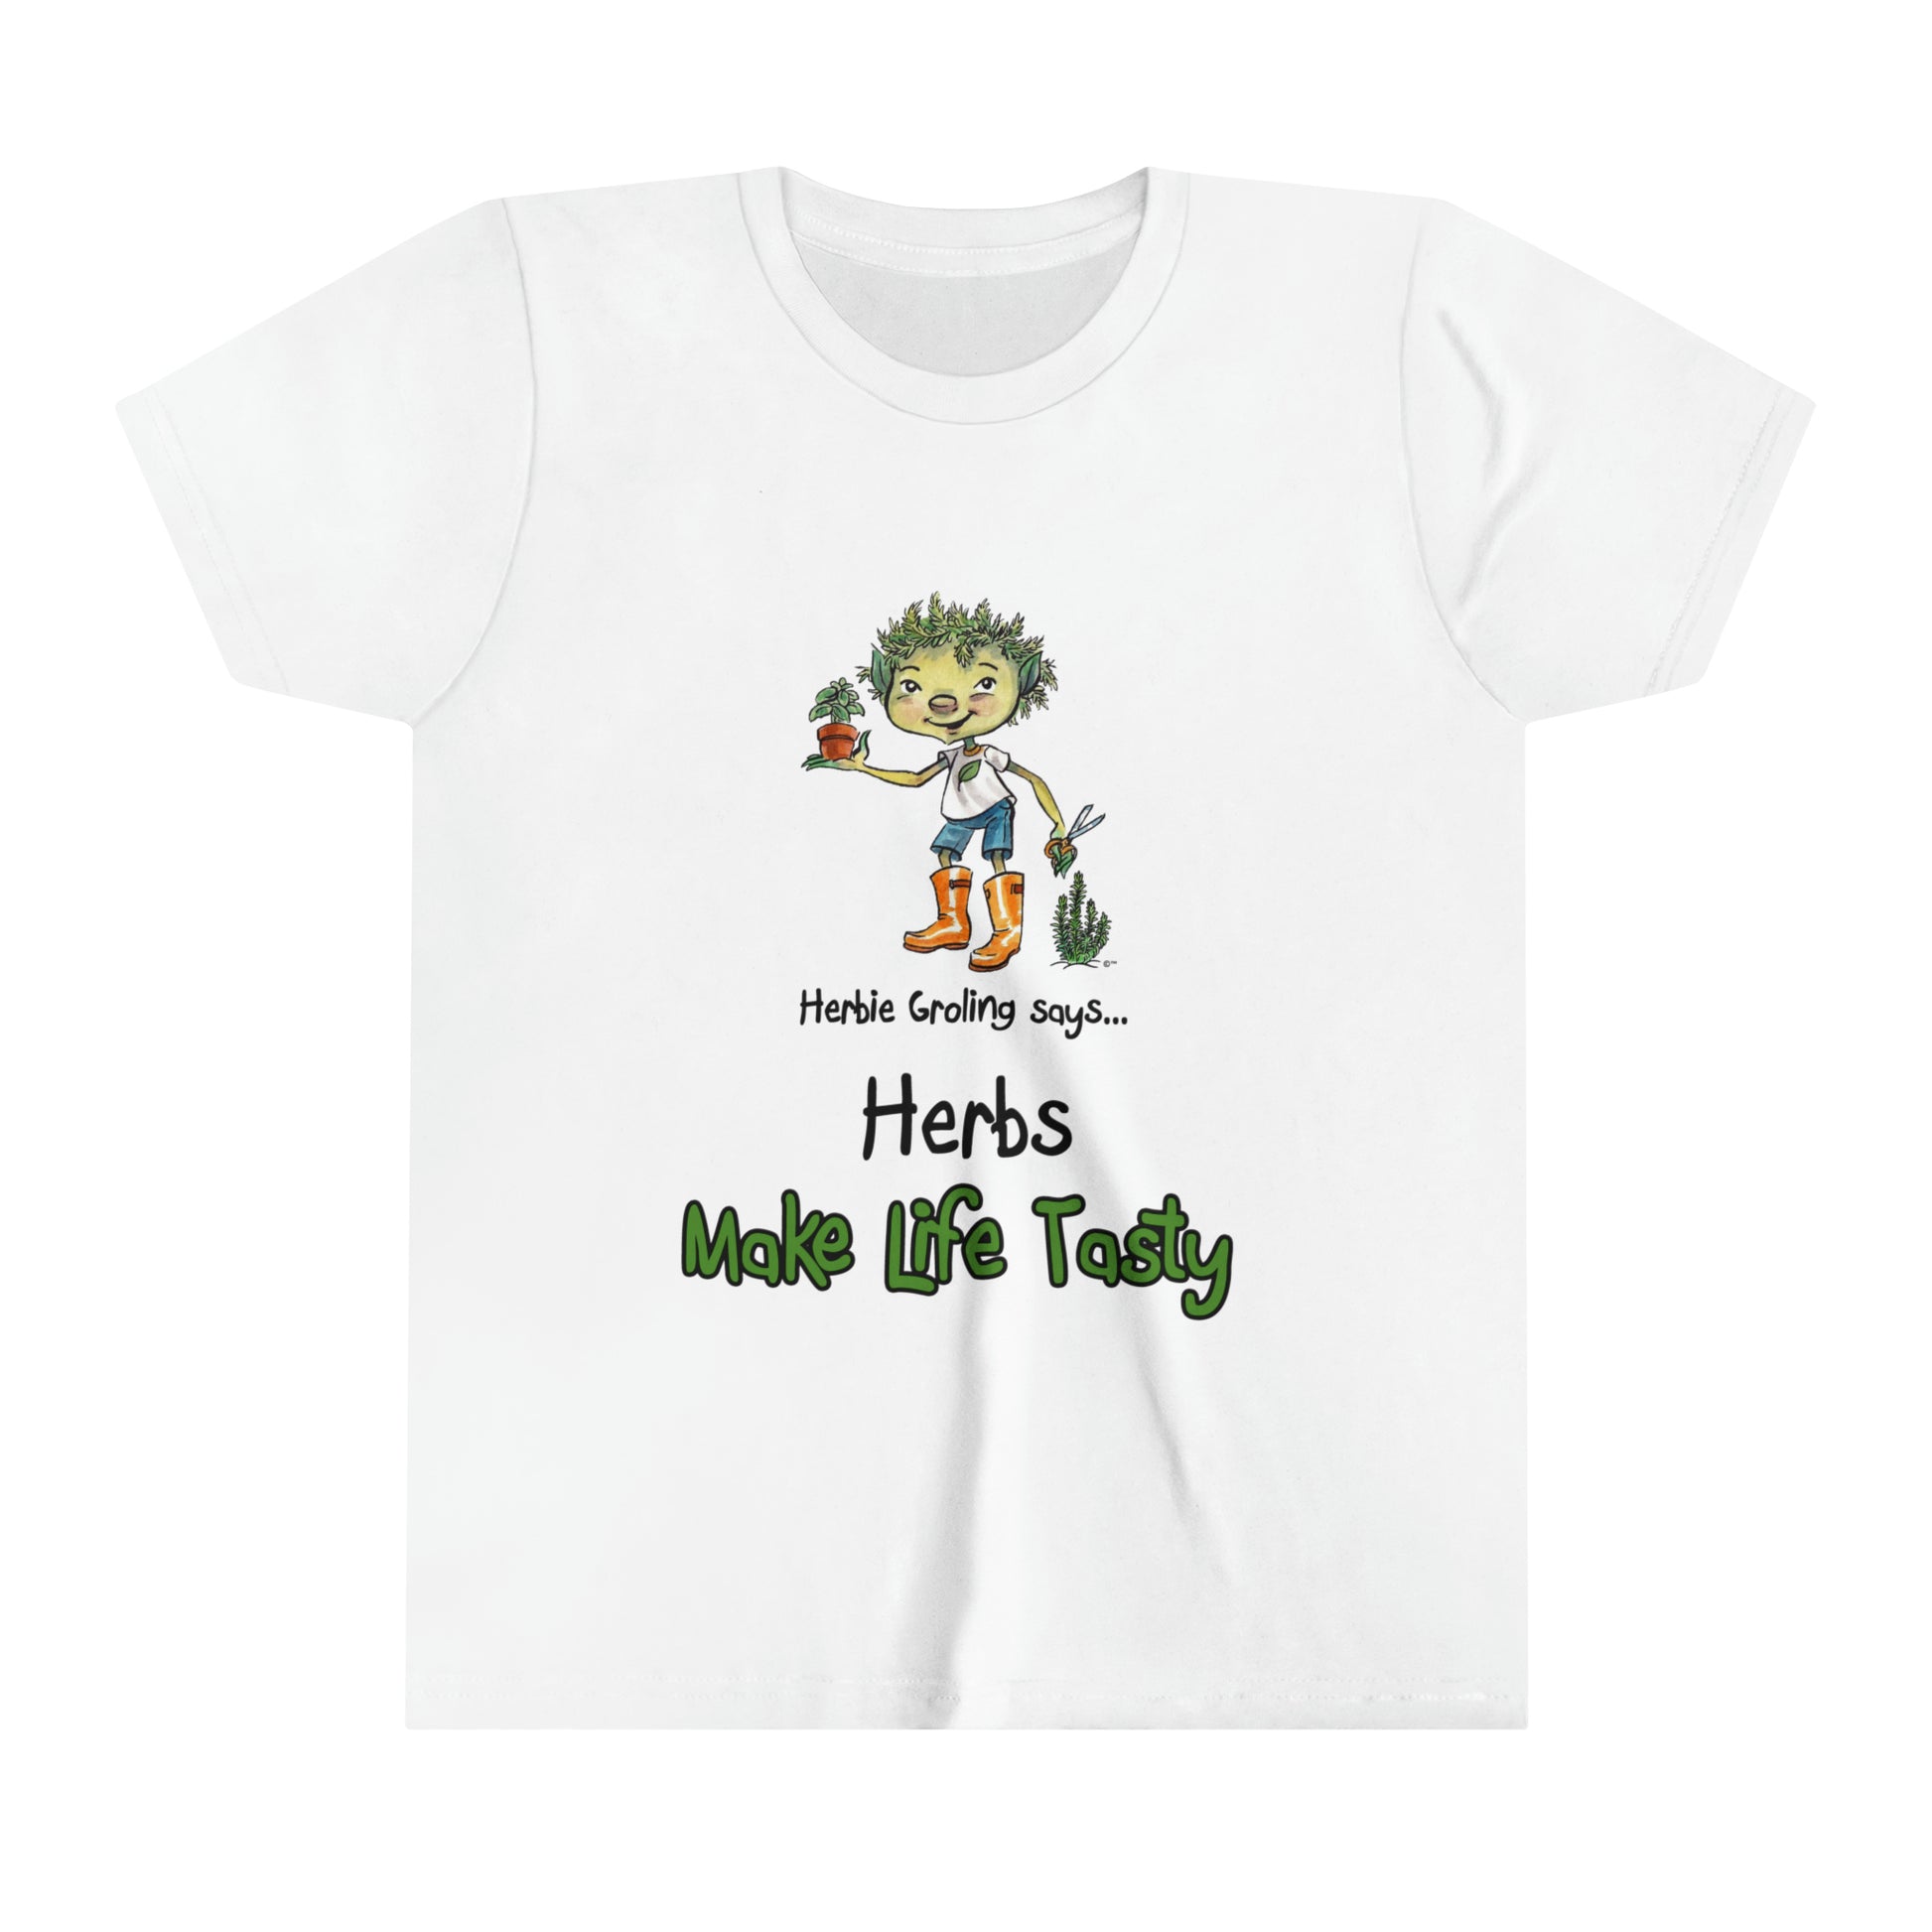 A white official Grolings kids' t-shirt, featuring the phrase 'Herbie Groling says... Herbs Make Life Tasty. The t-shirt showcases Herbie Groling, holding a basil plant in a pot. Beside Herbie, a thriving rosemary bush adds to the scene. The imagery highlights the delightful flavours and aromatic qualities that herbs bring to our lives, encouraging an appreciation for the culinary joys and benefits of herbs.